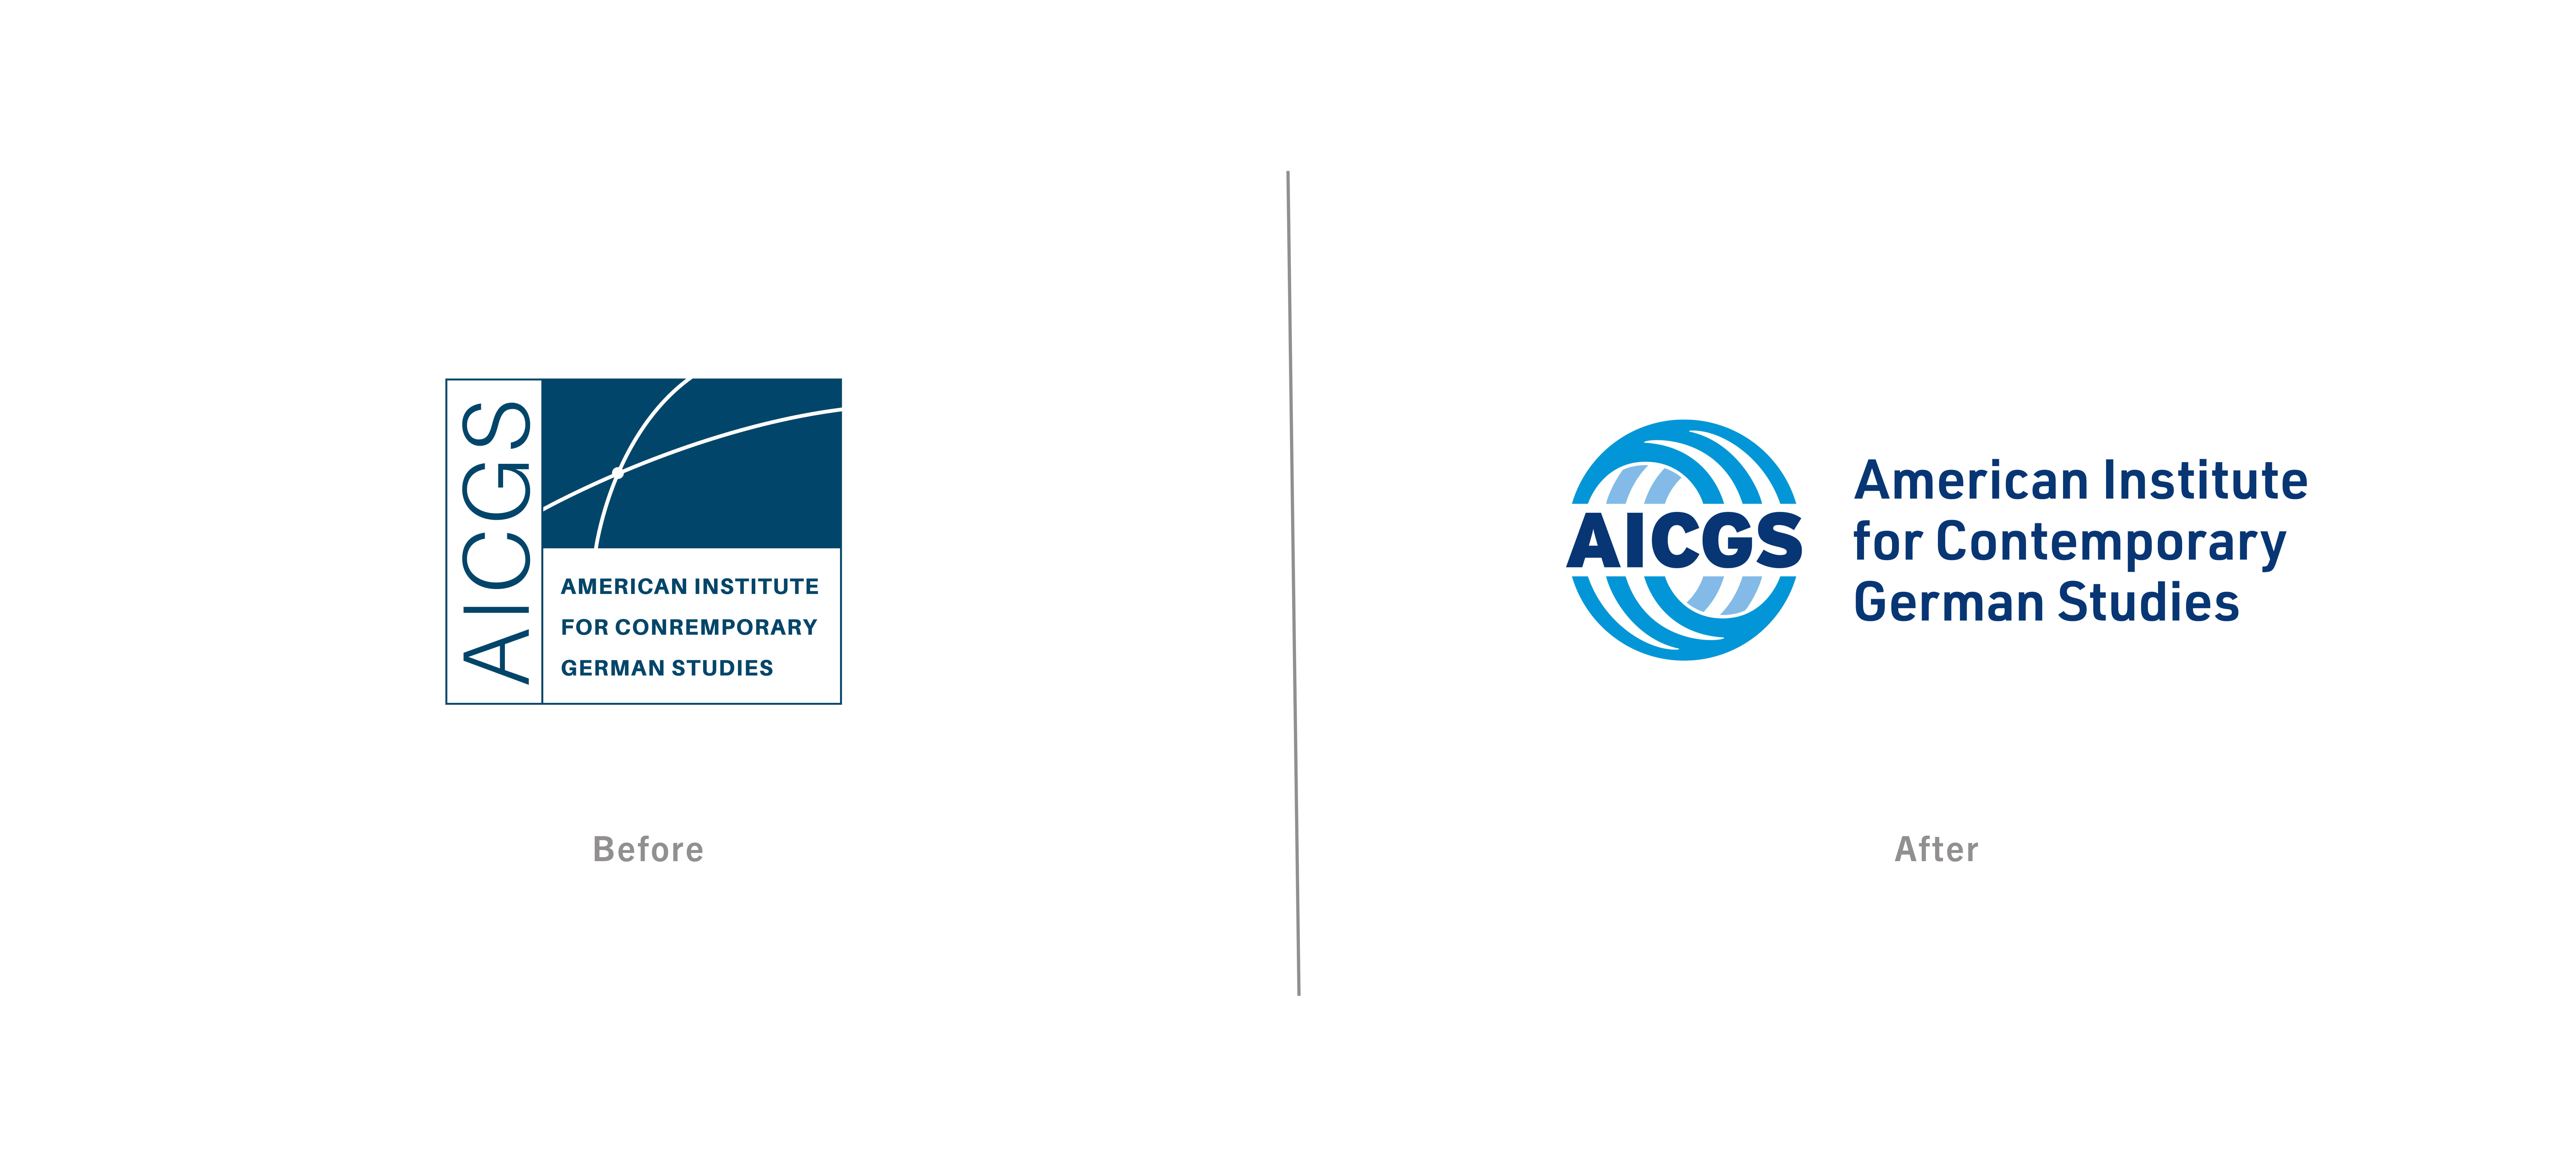 Before and after comparison of the AICGS logo after ob9's rebrand.